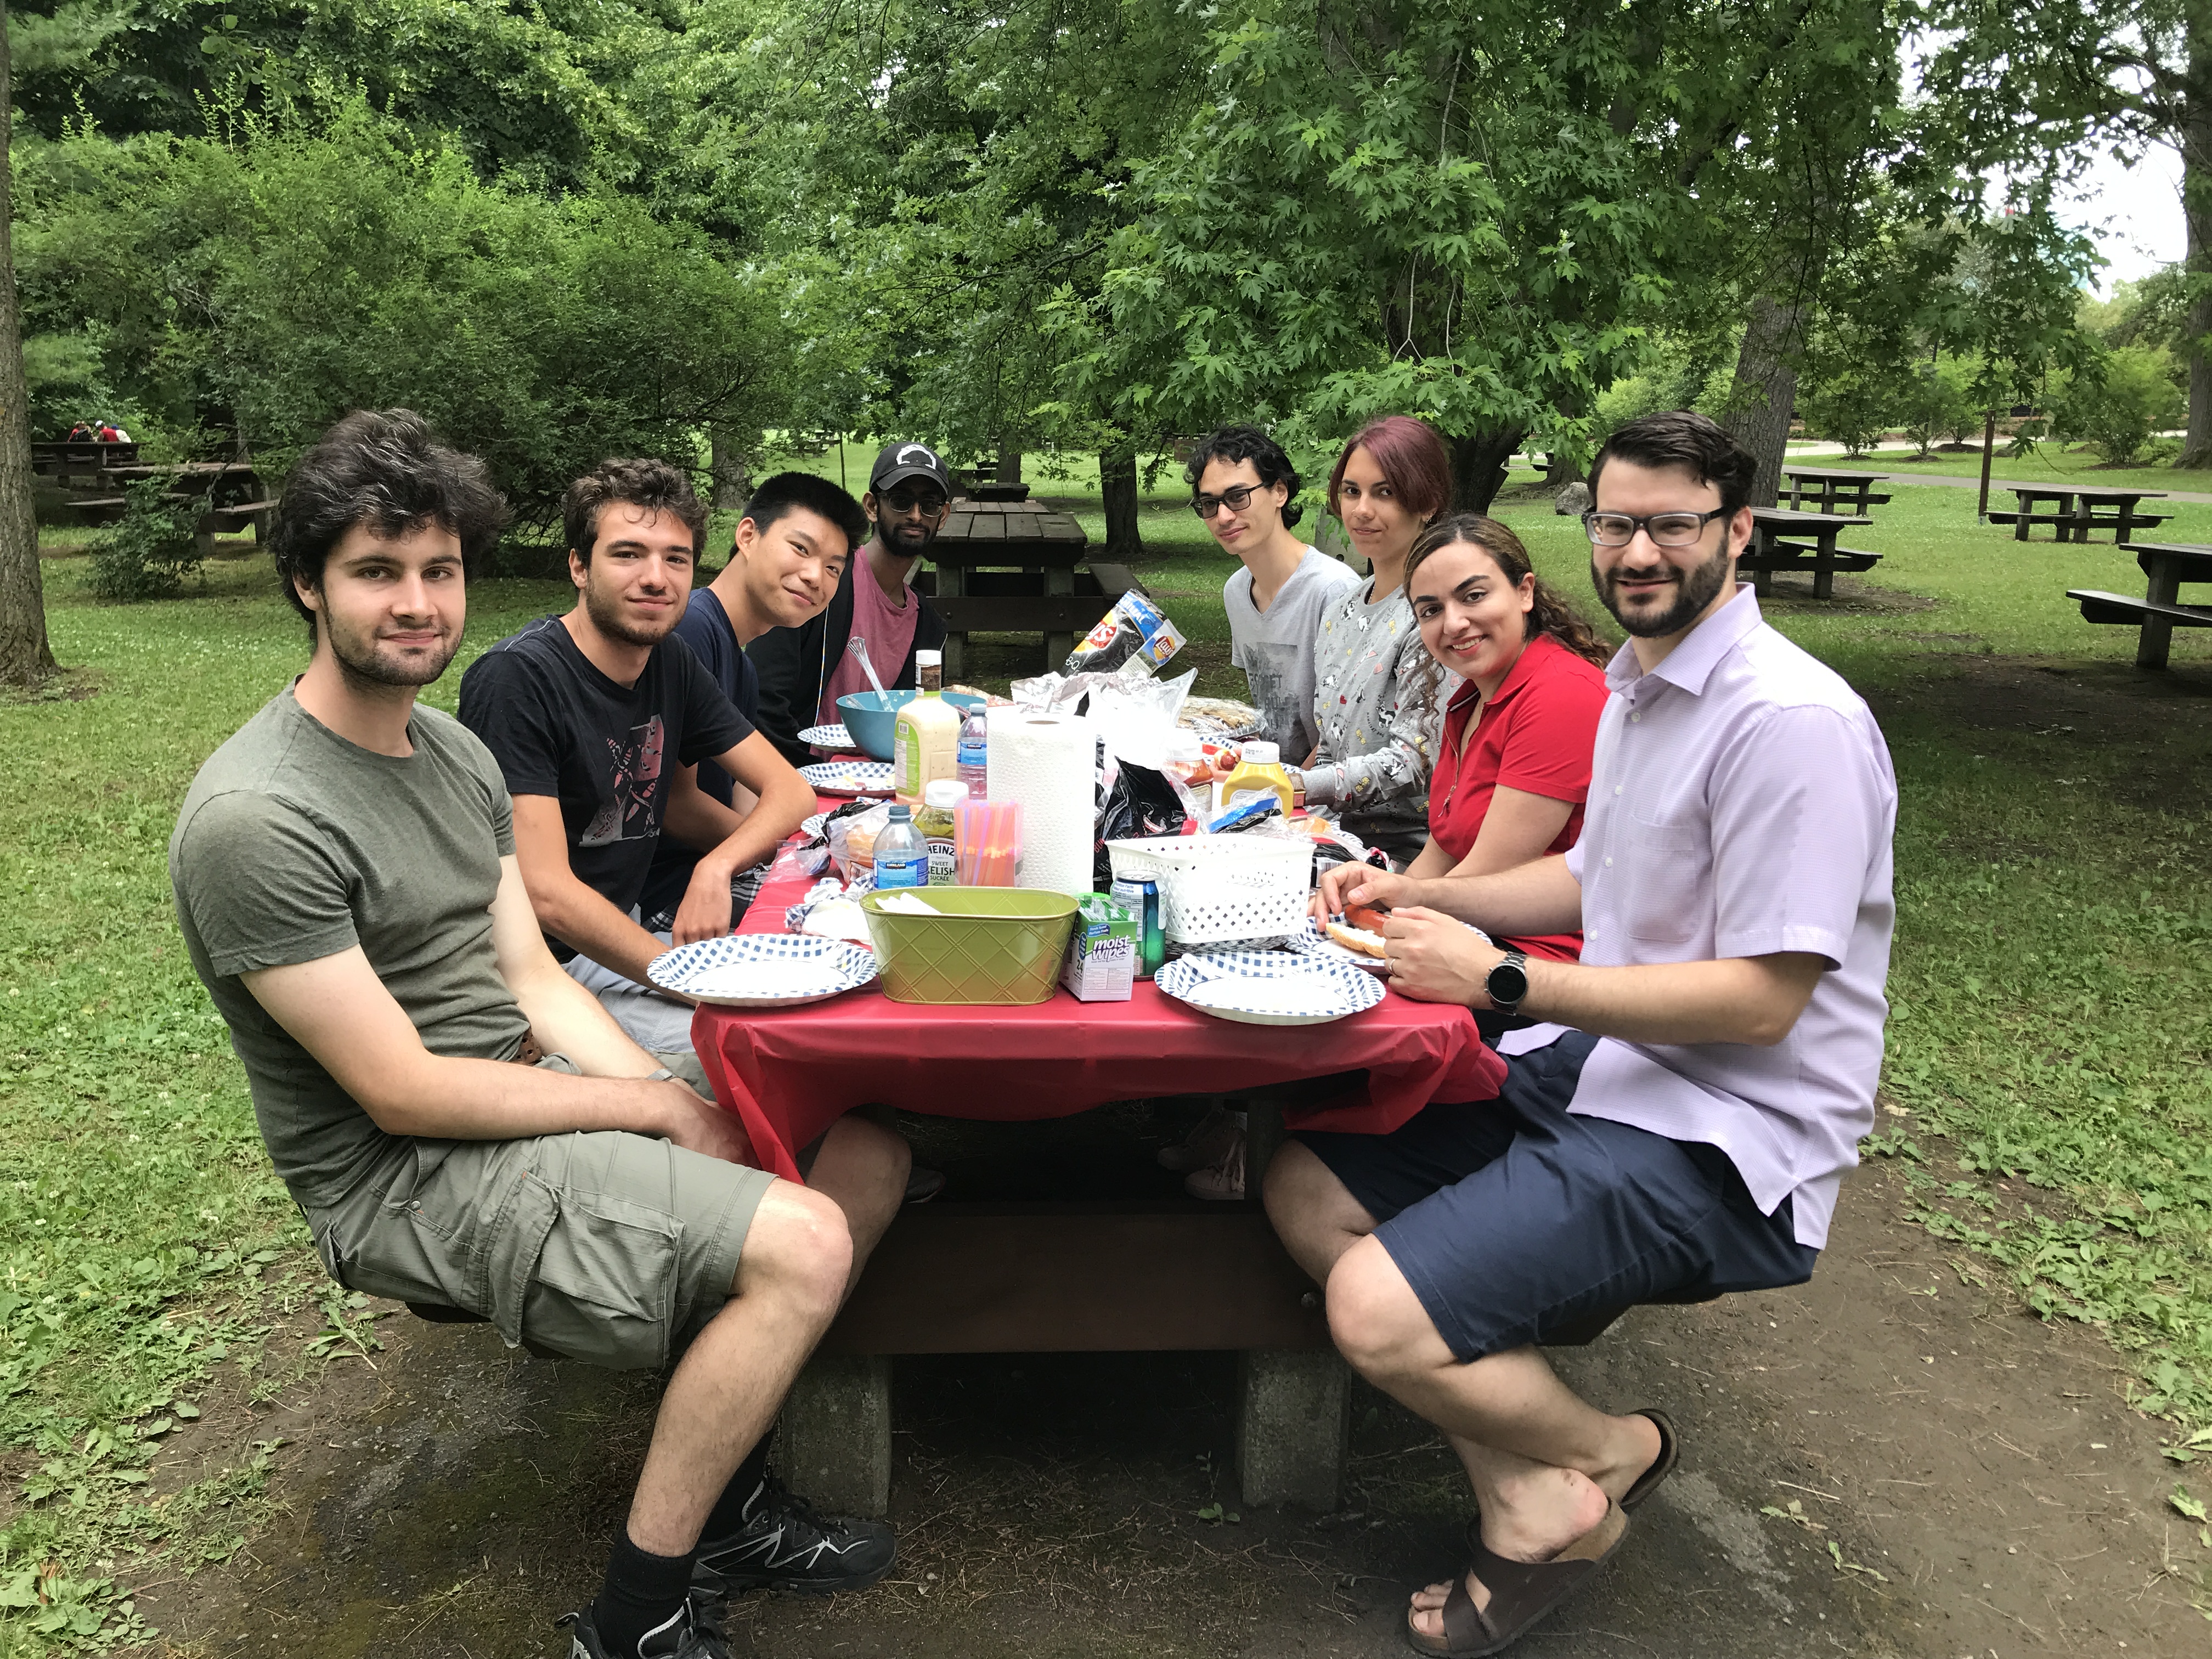 Everyone enjoying lunch together at the 1st Annual CyberSEA Research Lab Summer BBQ